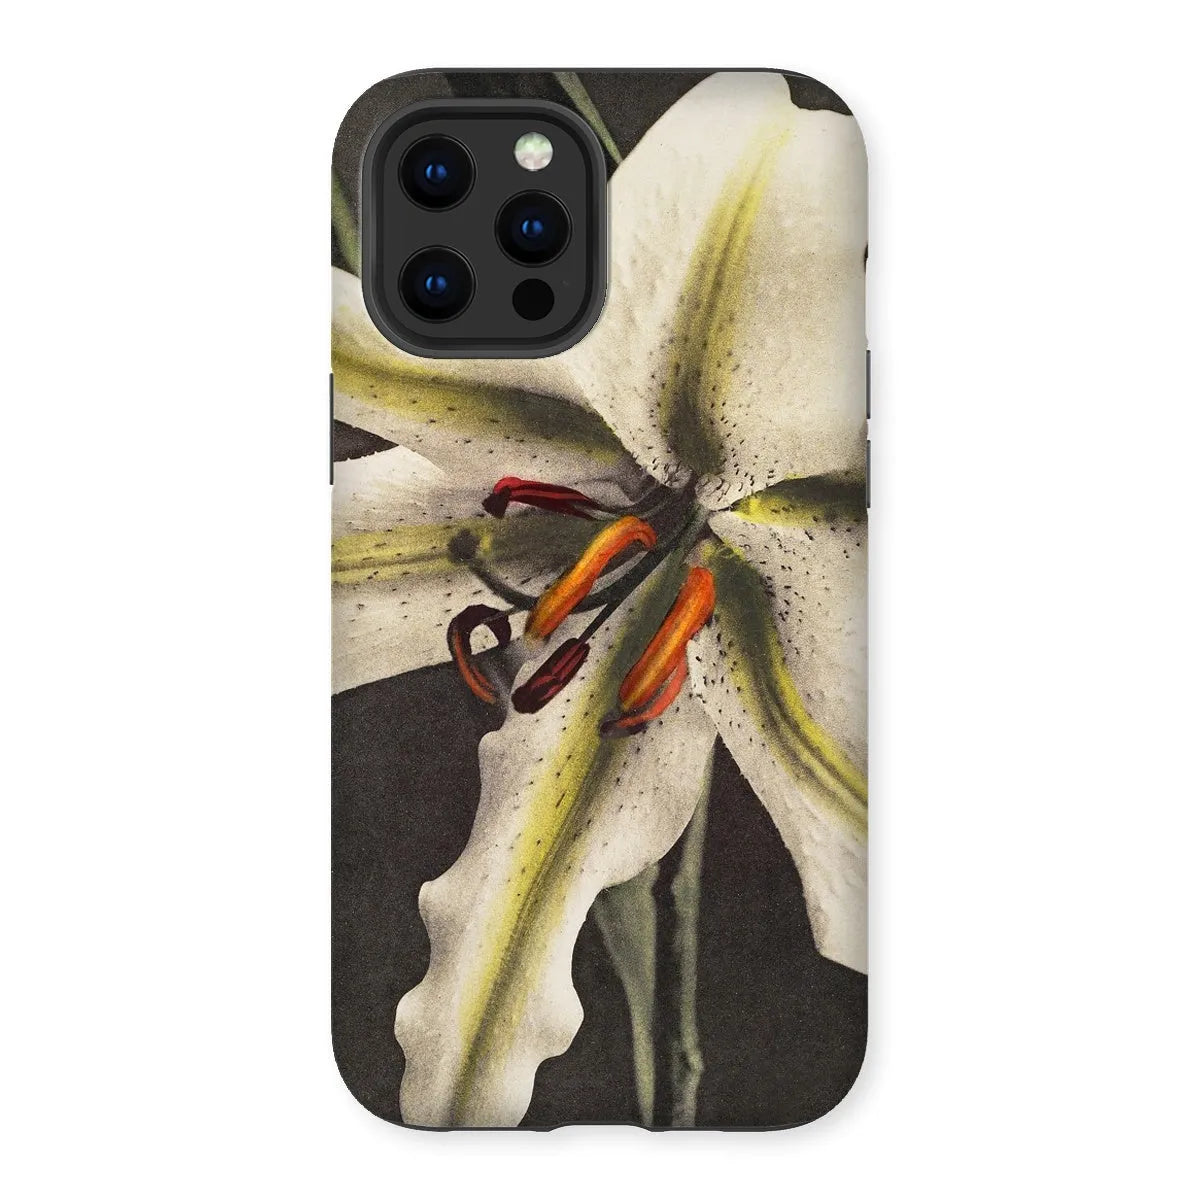 Lily By Kazumasa Ogawa Art Phone Case - Iphone 12 Pro Max / Matte - Mobile Phone Cases - Aesthetic Art